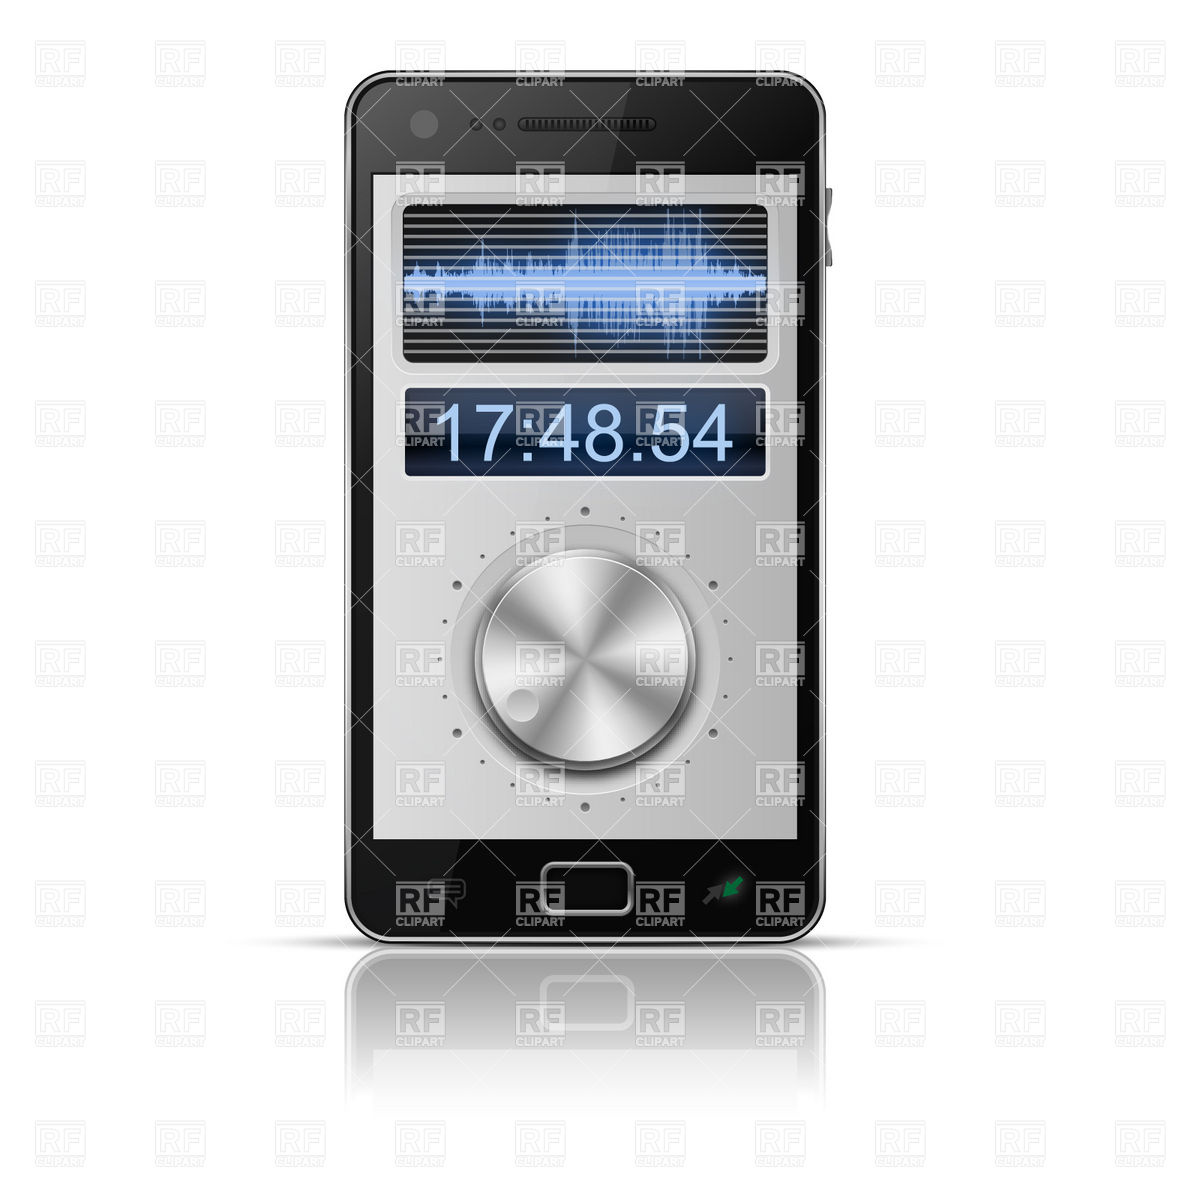 Audio Software Interface For Smartphone Download Royalty Free Vector